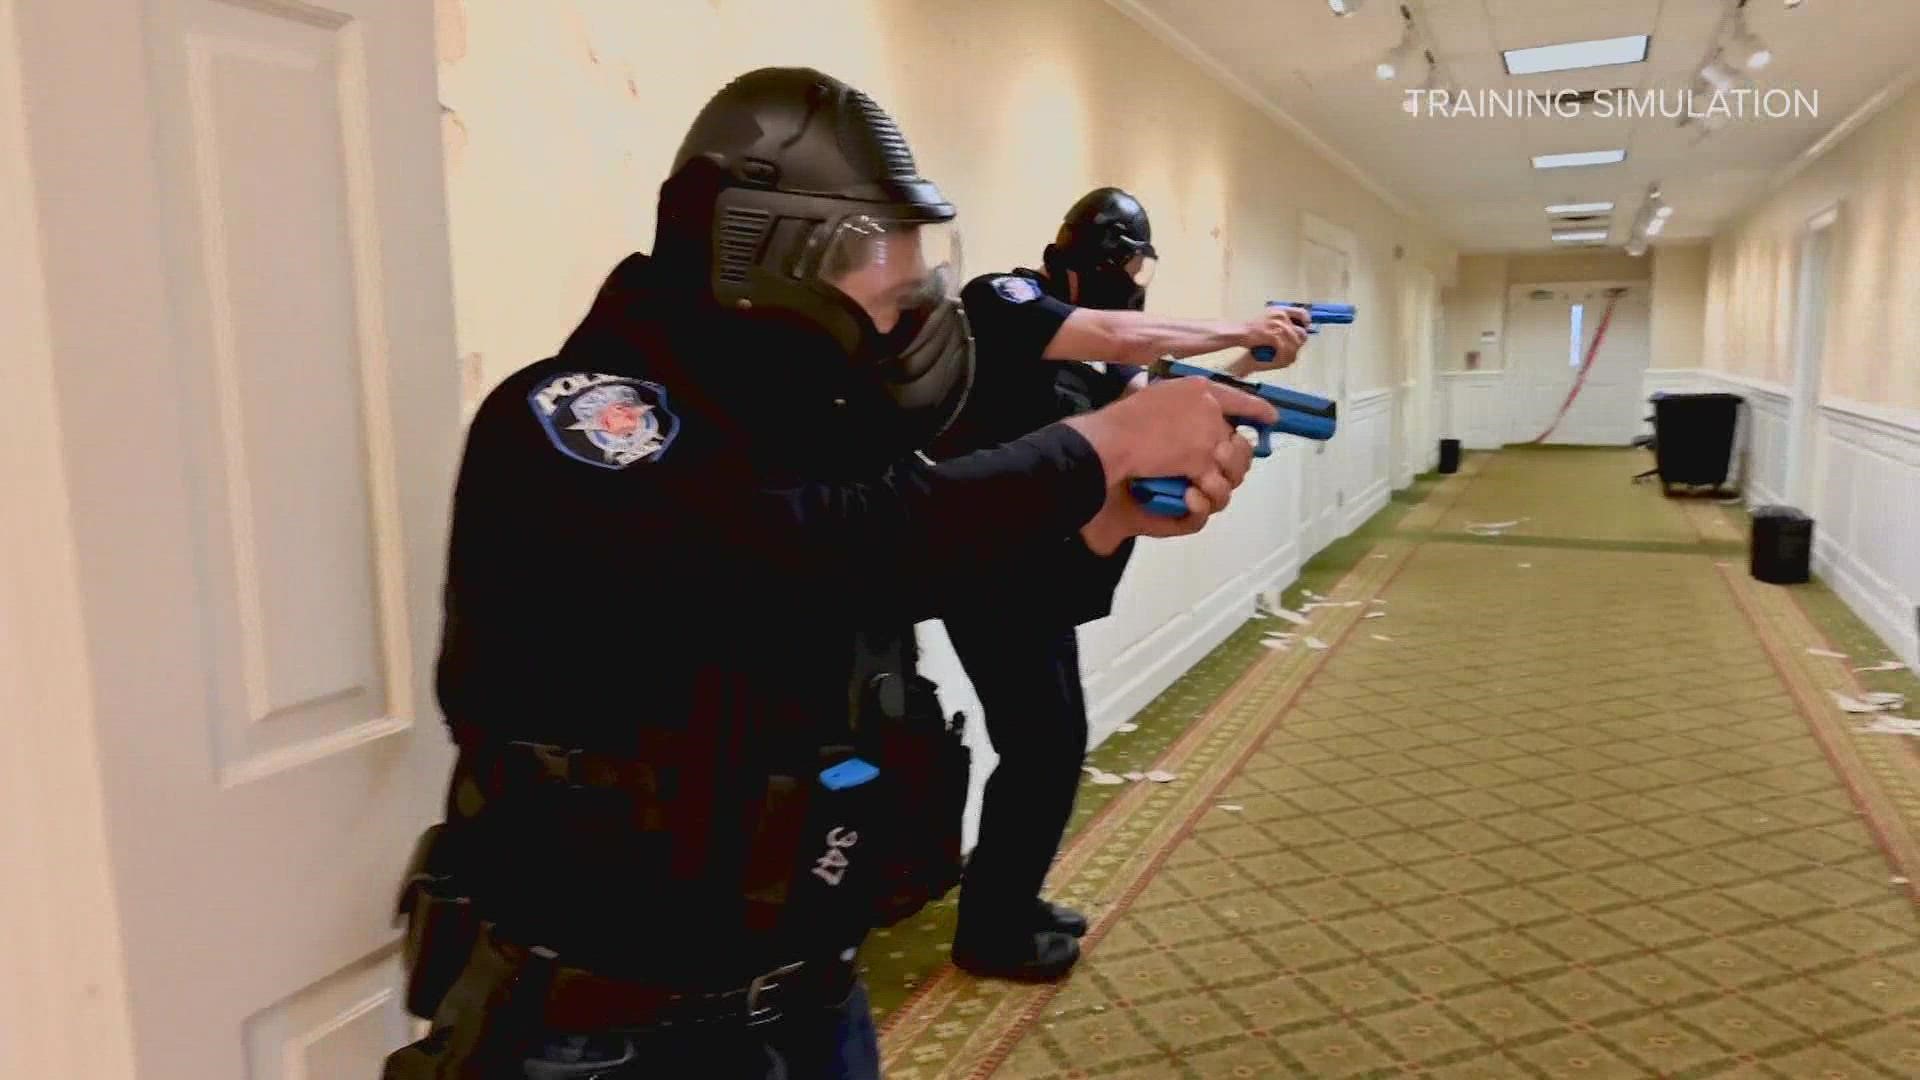 The police department at SMU is partnering with neighboring police agencies to train on active threat situations.